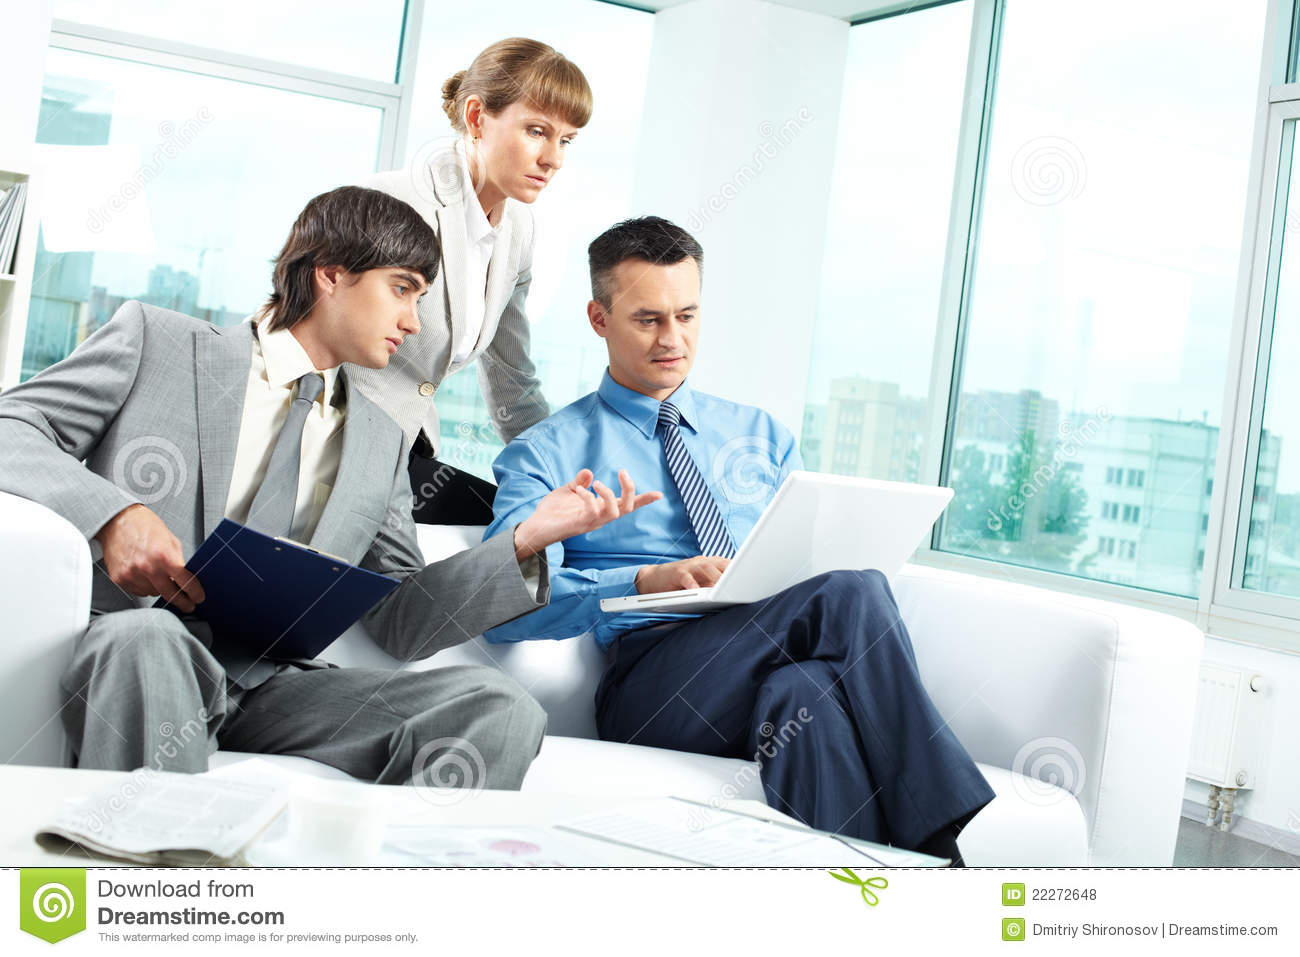 6 Stock Photos Consulting Images